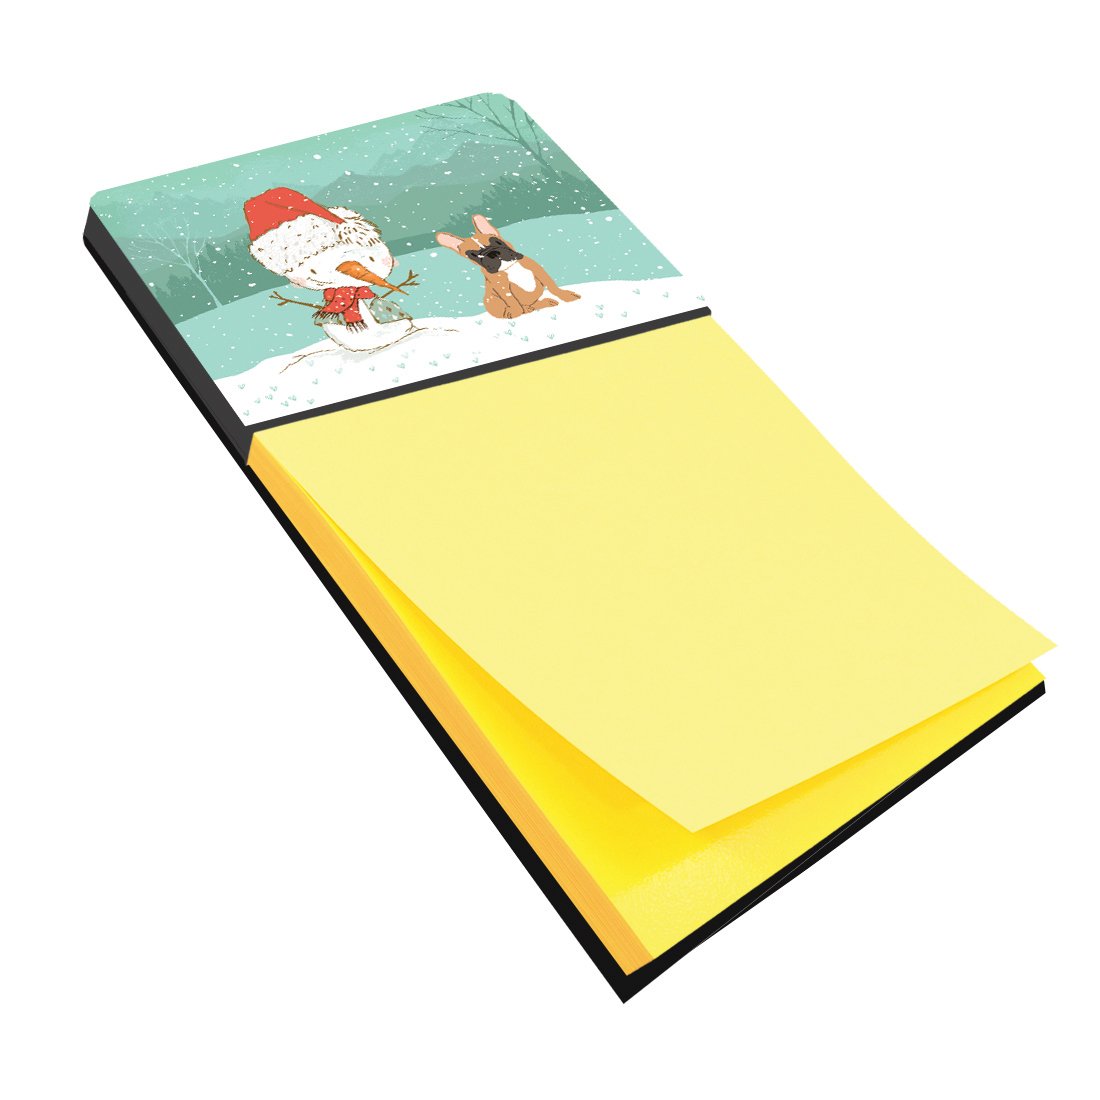 Fawn French Bulldog Snowman Christmas Sticky Note Holder CK2086SN by Caroline's Treasures